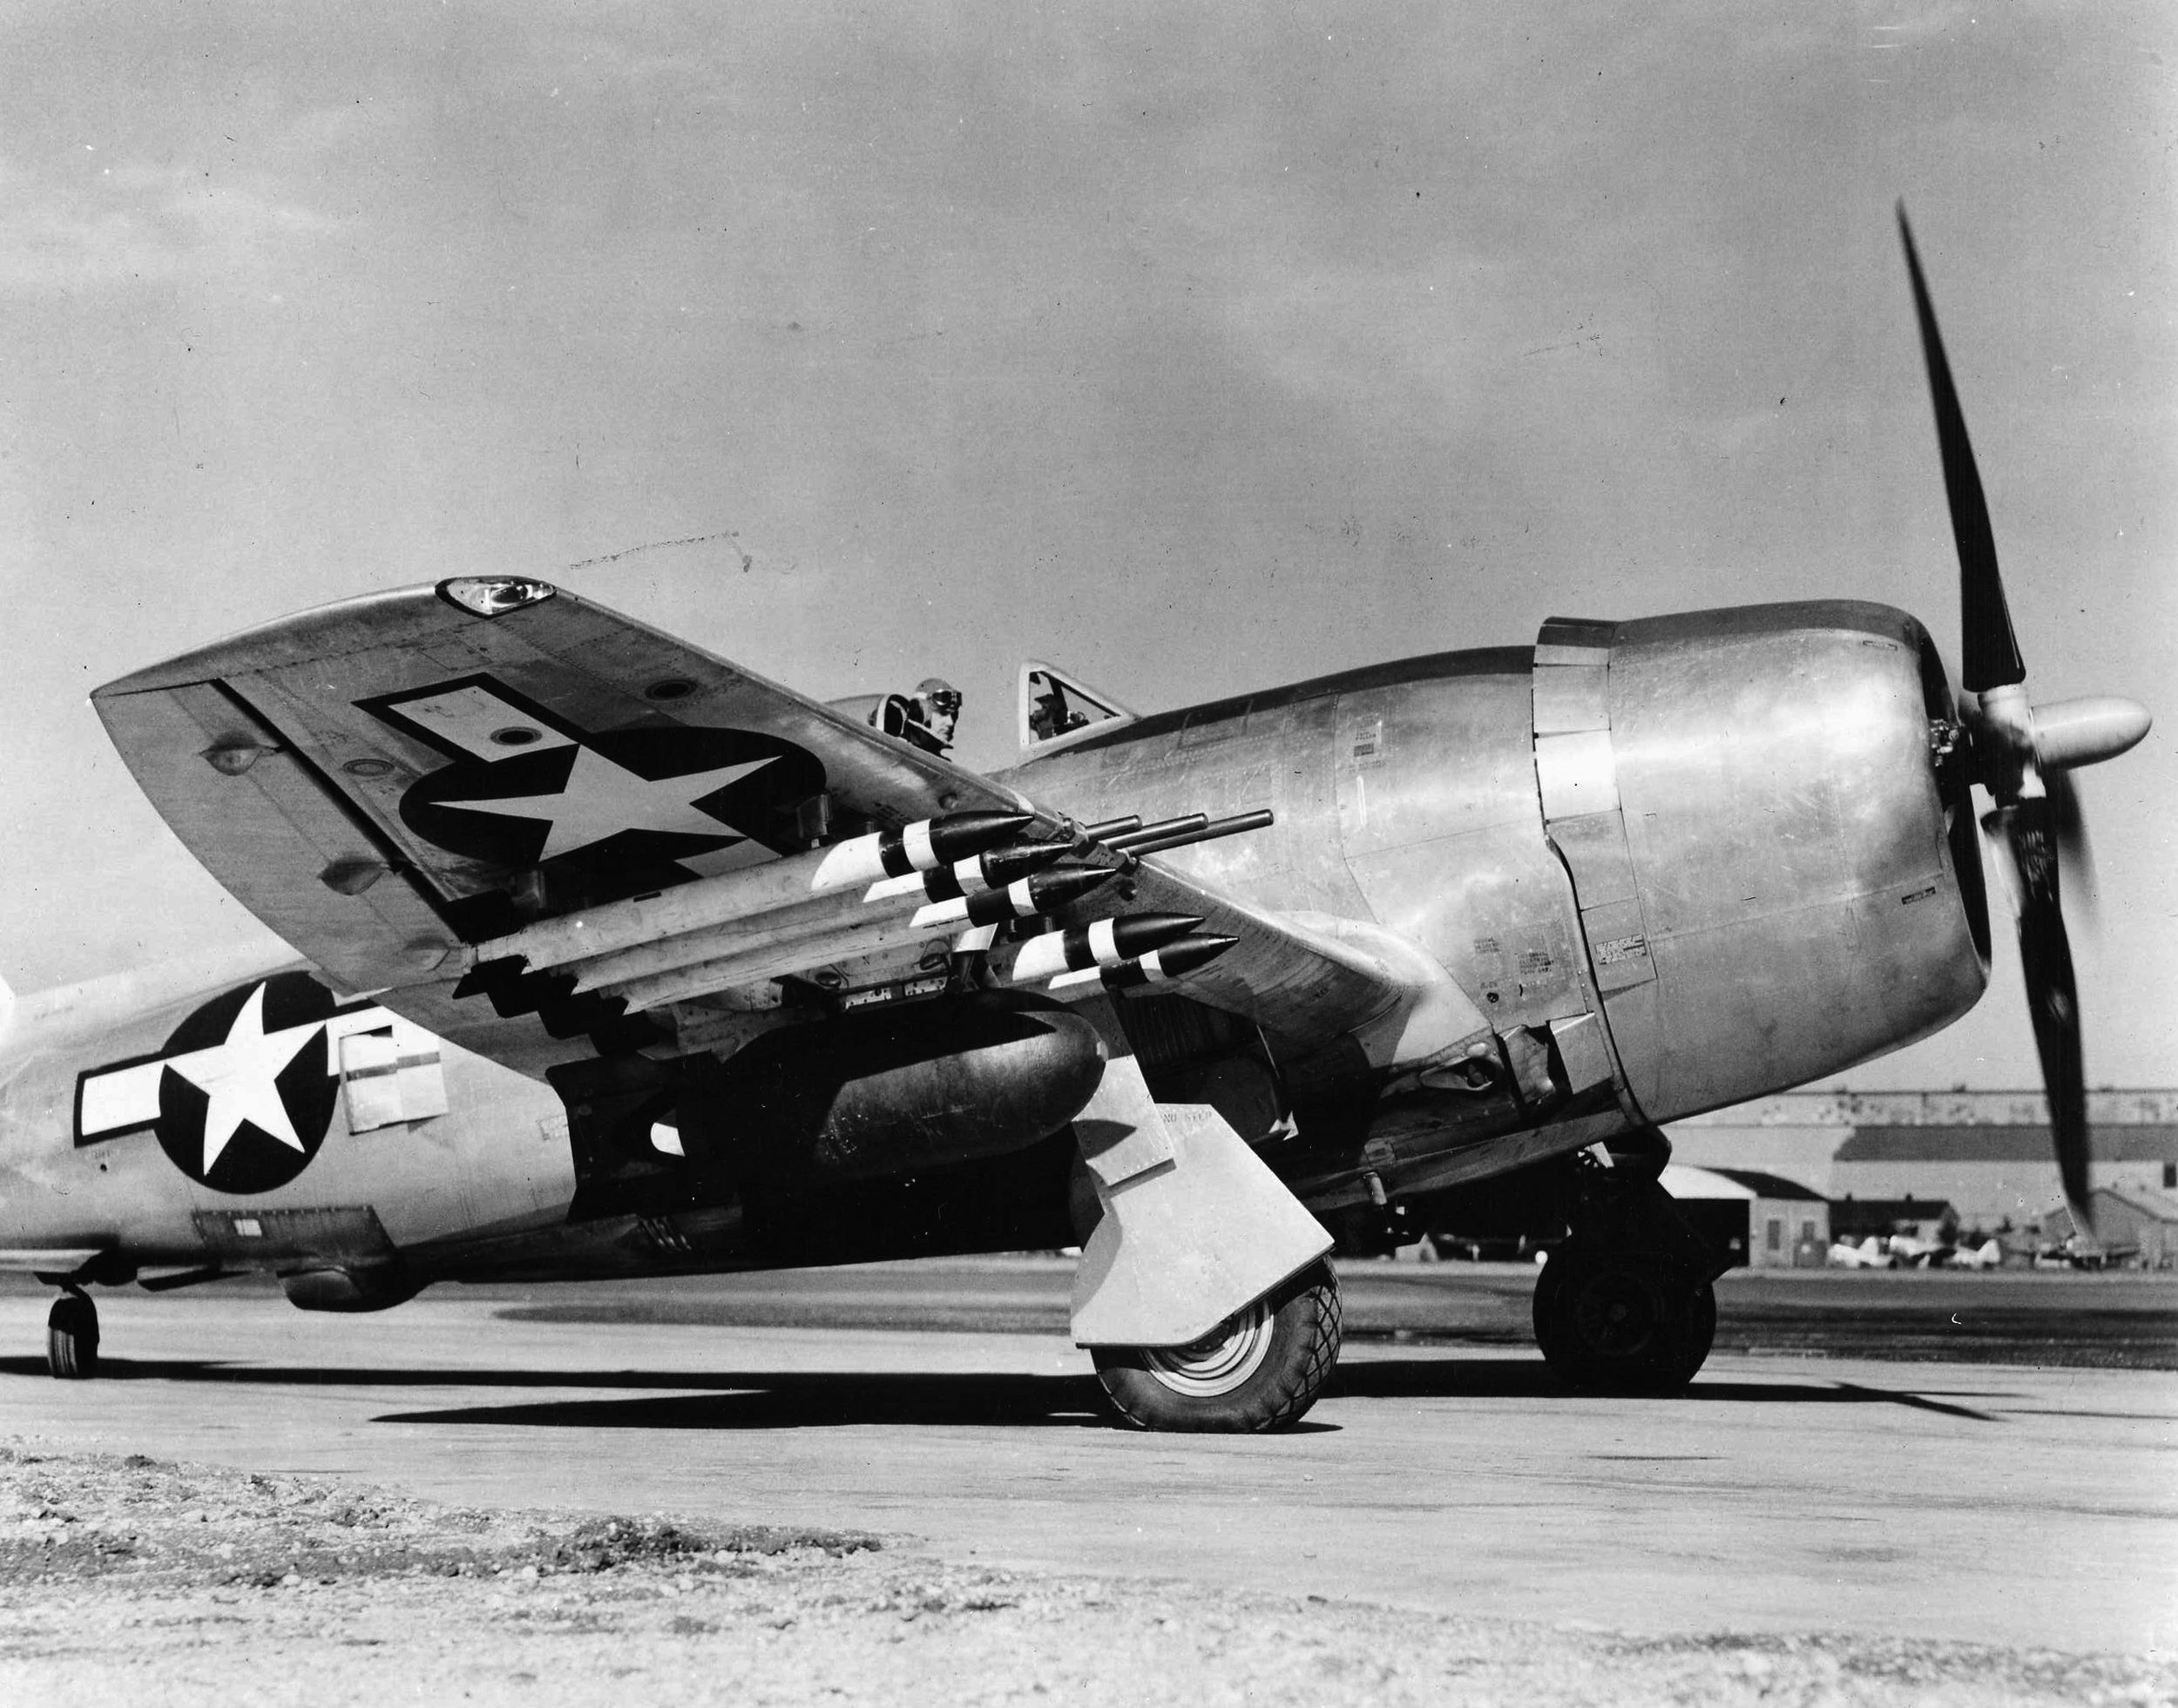 The P-47N, with squared wingtips, was developed by Republic Aviation in cooperation with the Air Technical Service Command. The design progressed from the drawing board to production in a remarkable 56 days. An additional aileron provided the aircraft with increased maneuverability. 